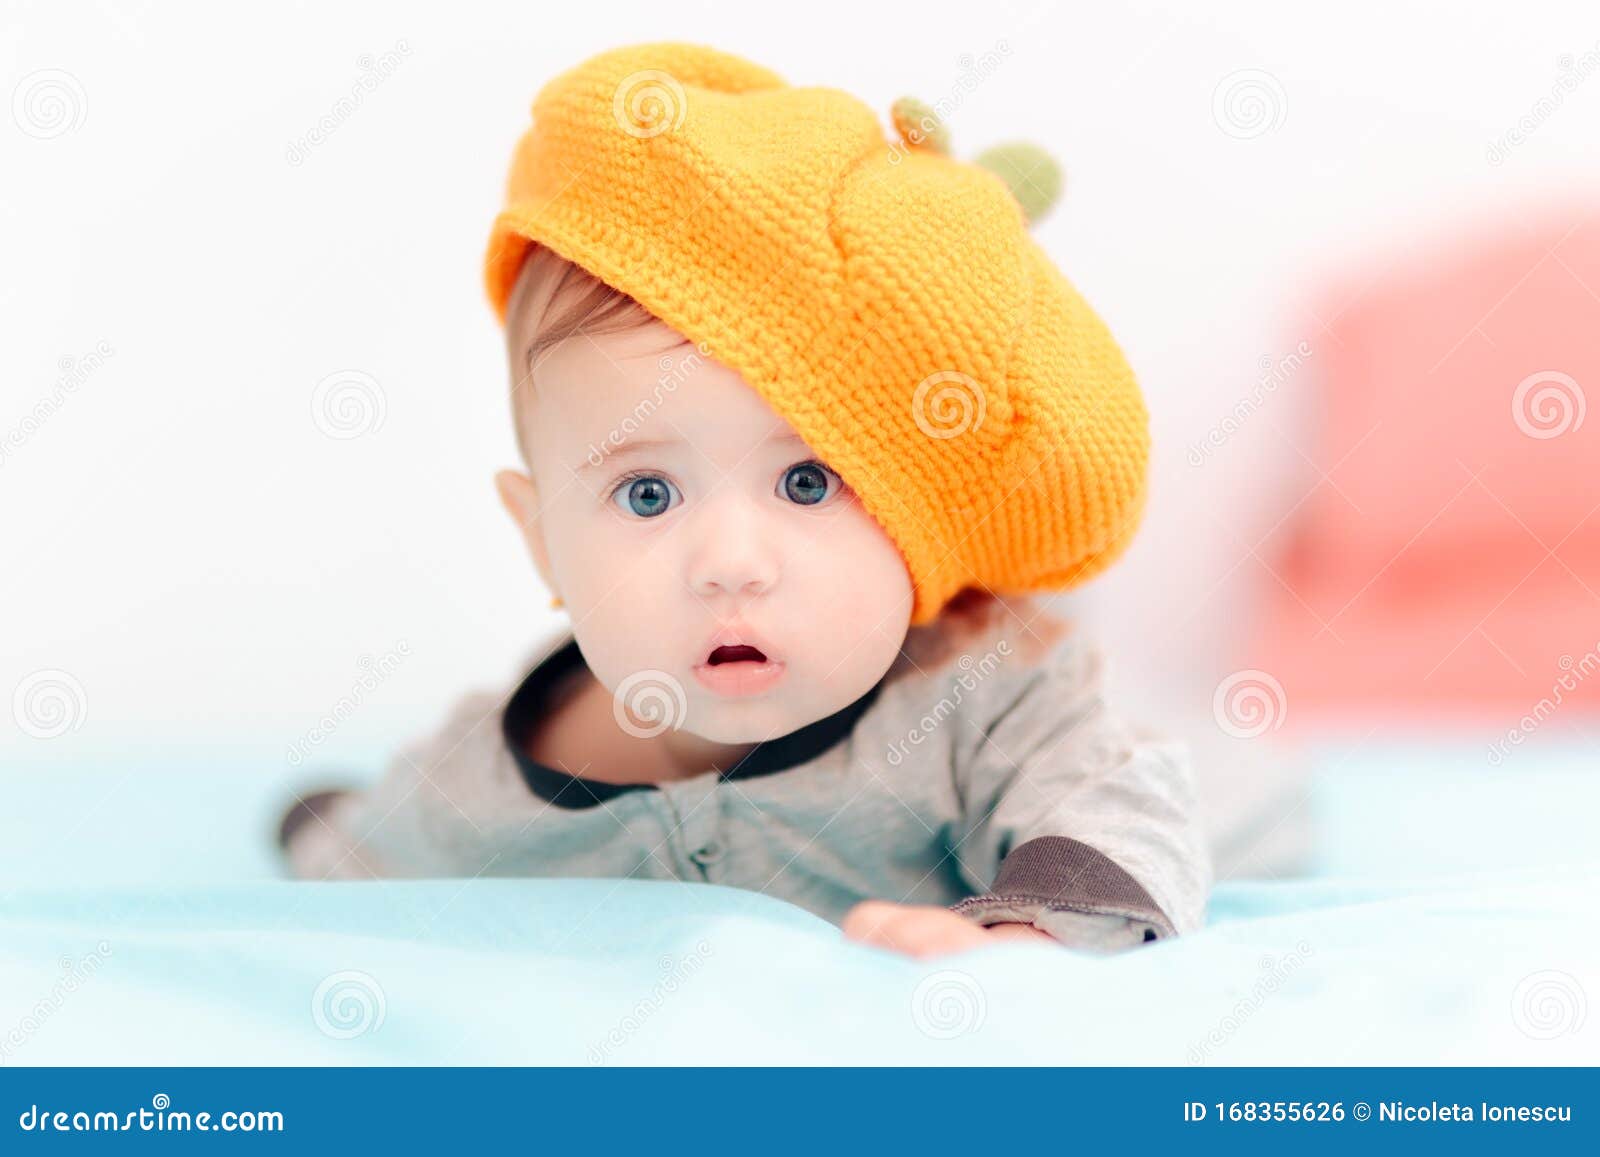 Funny Baby Girl Wearing Knitted Pumpkin Hat Stock Photo - Image of